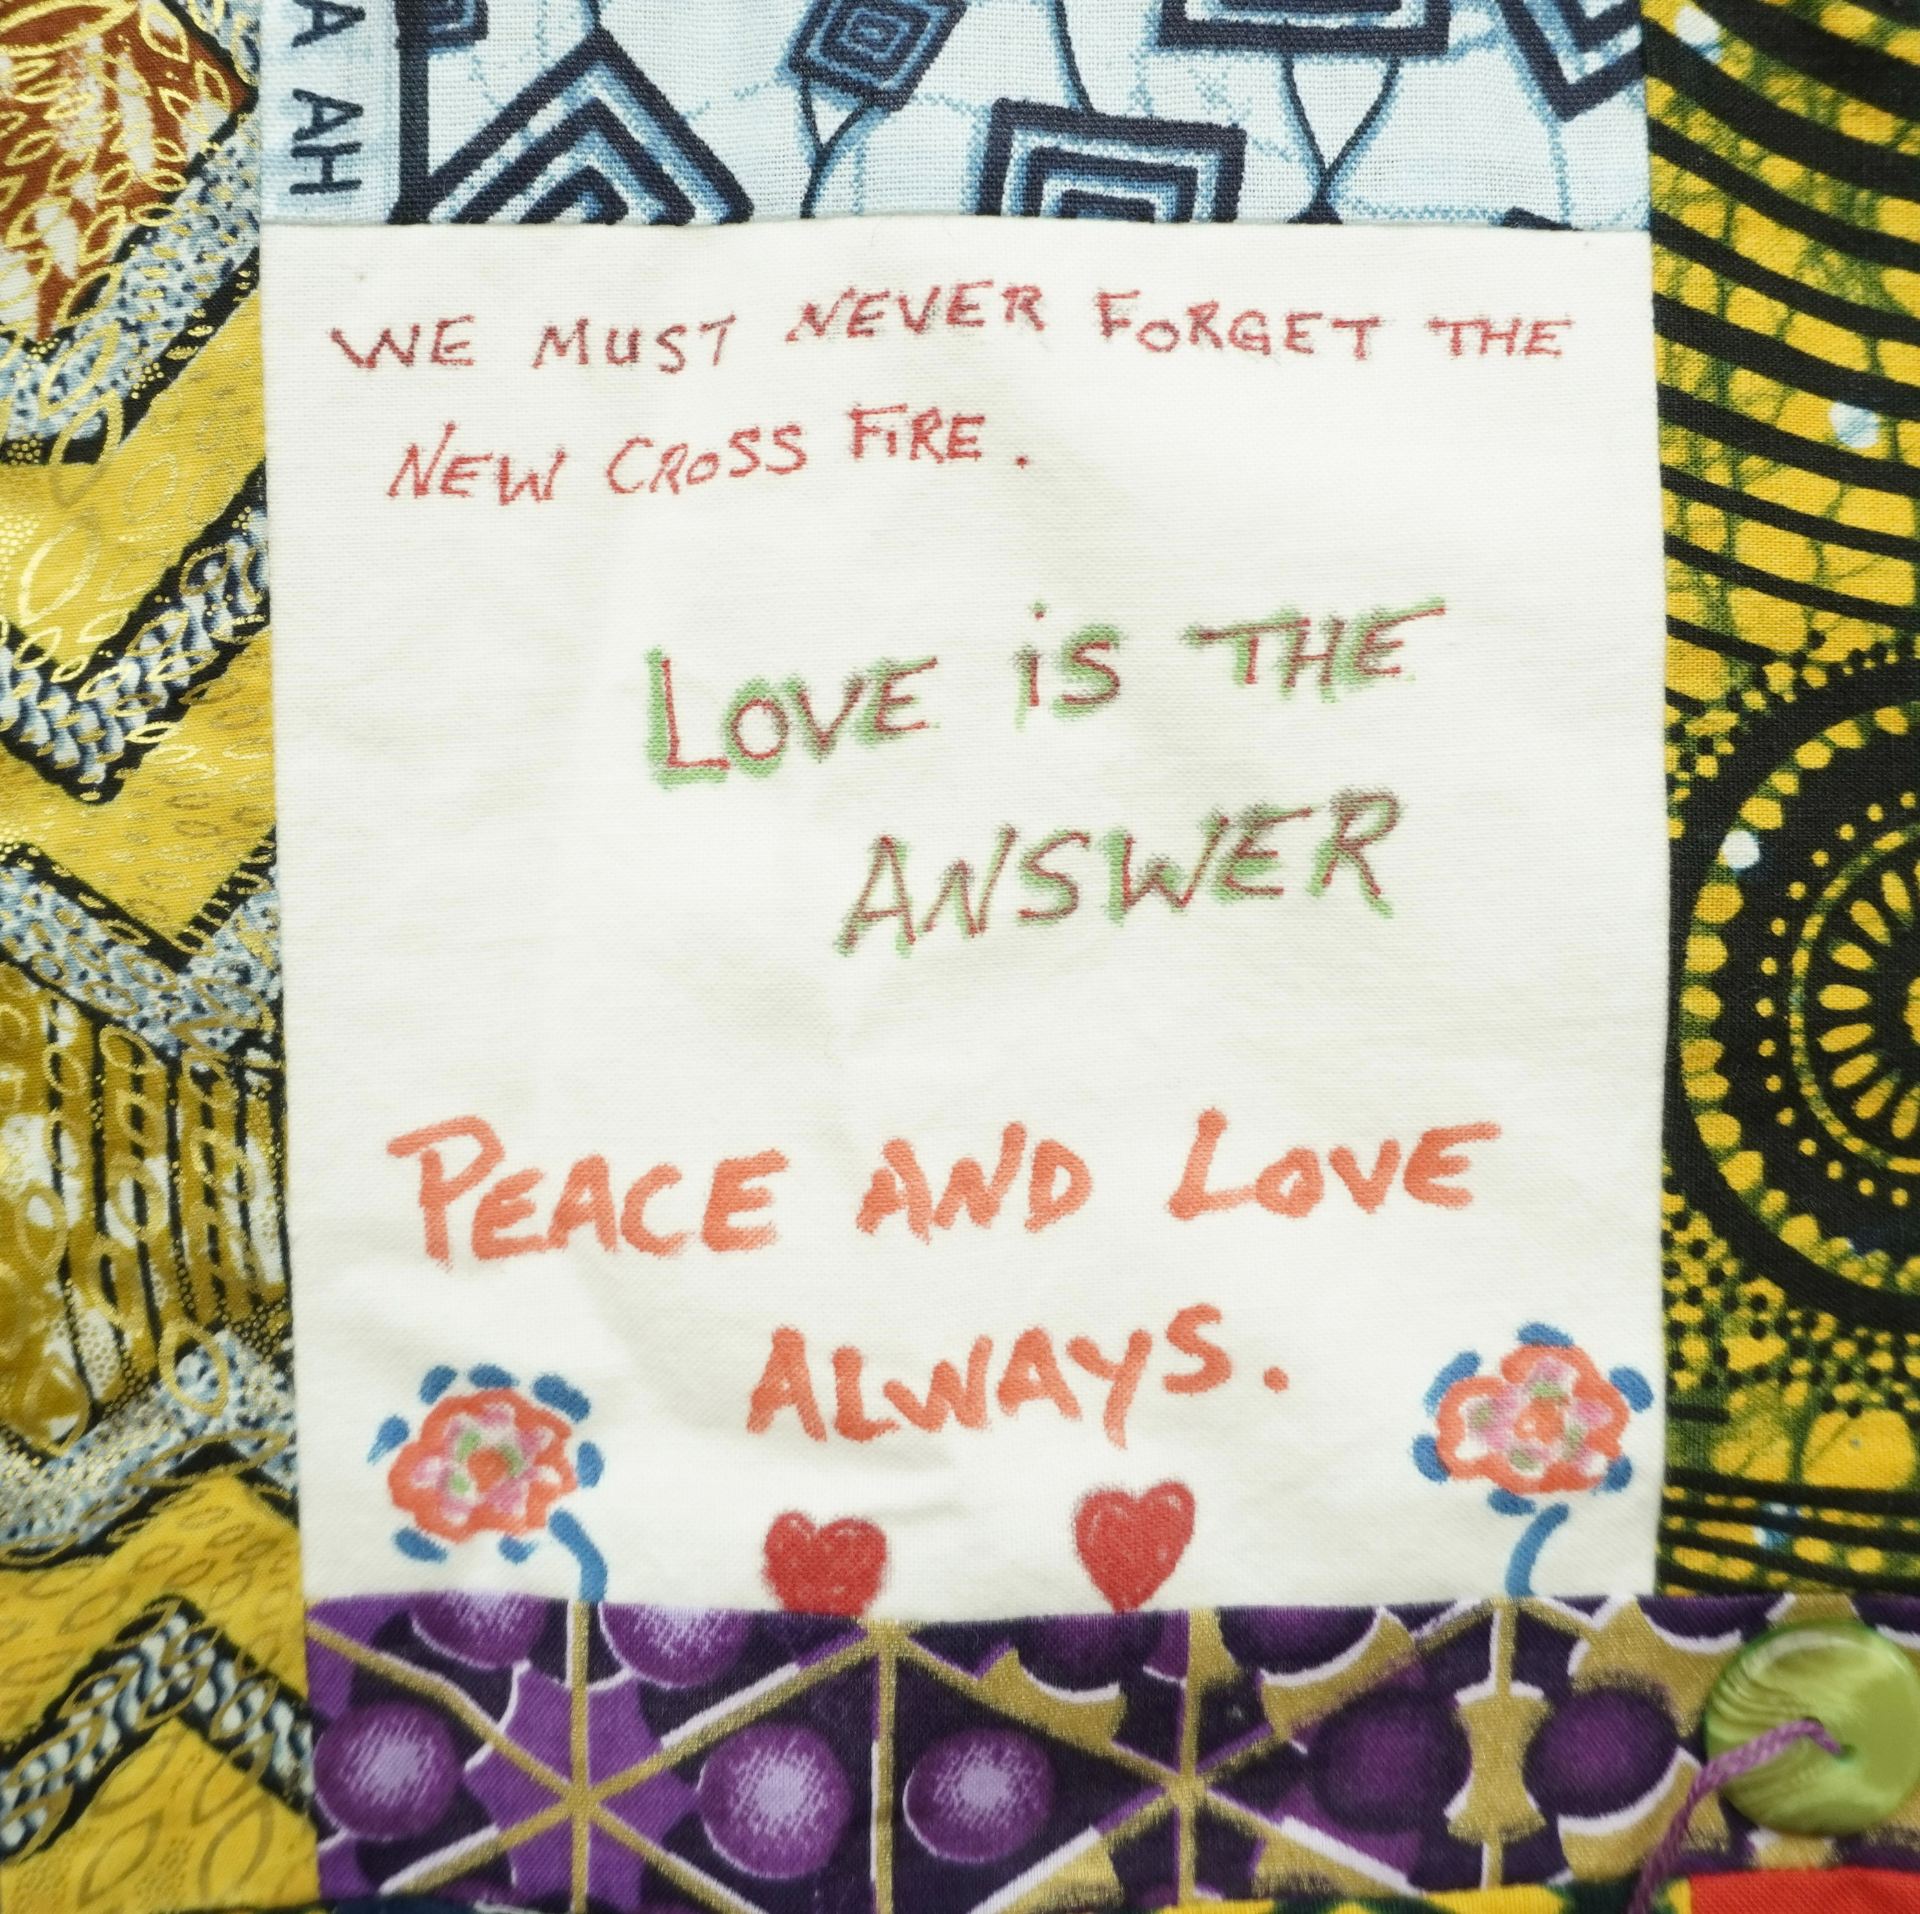 Commemorative quilt. Text reads, 'We must never forget the New Cross Fire. Love is the answer. Peace and love always'